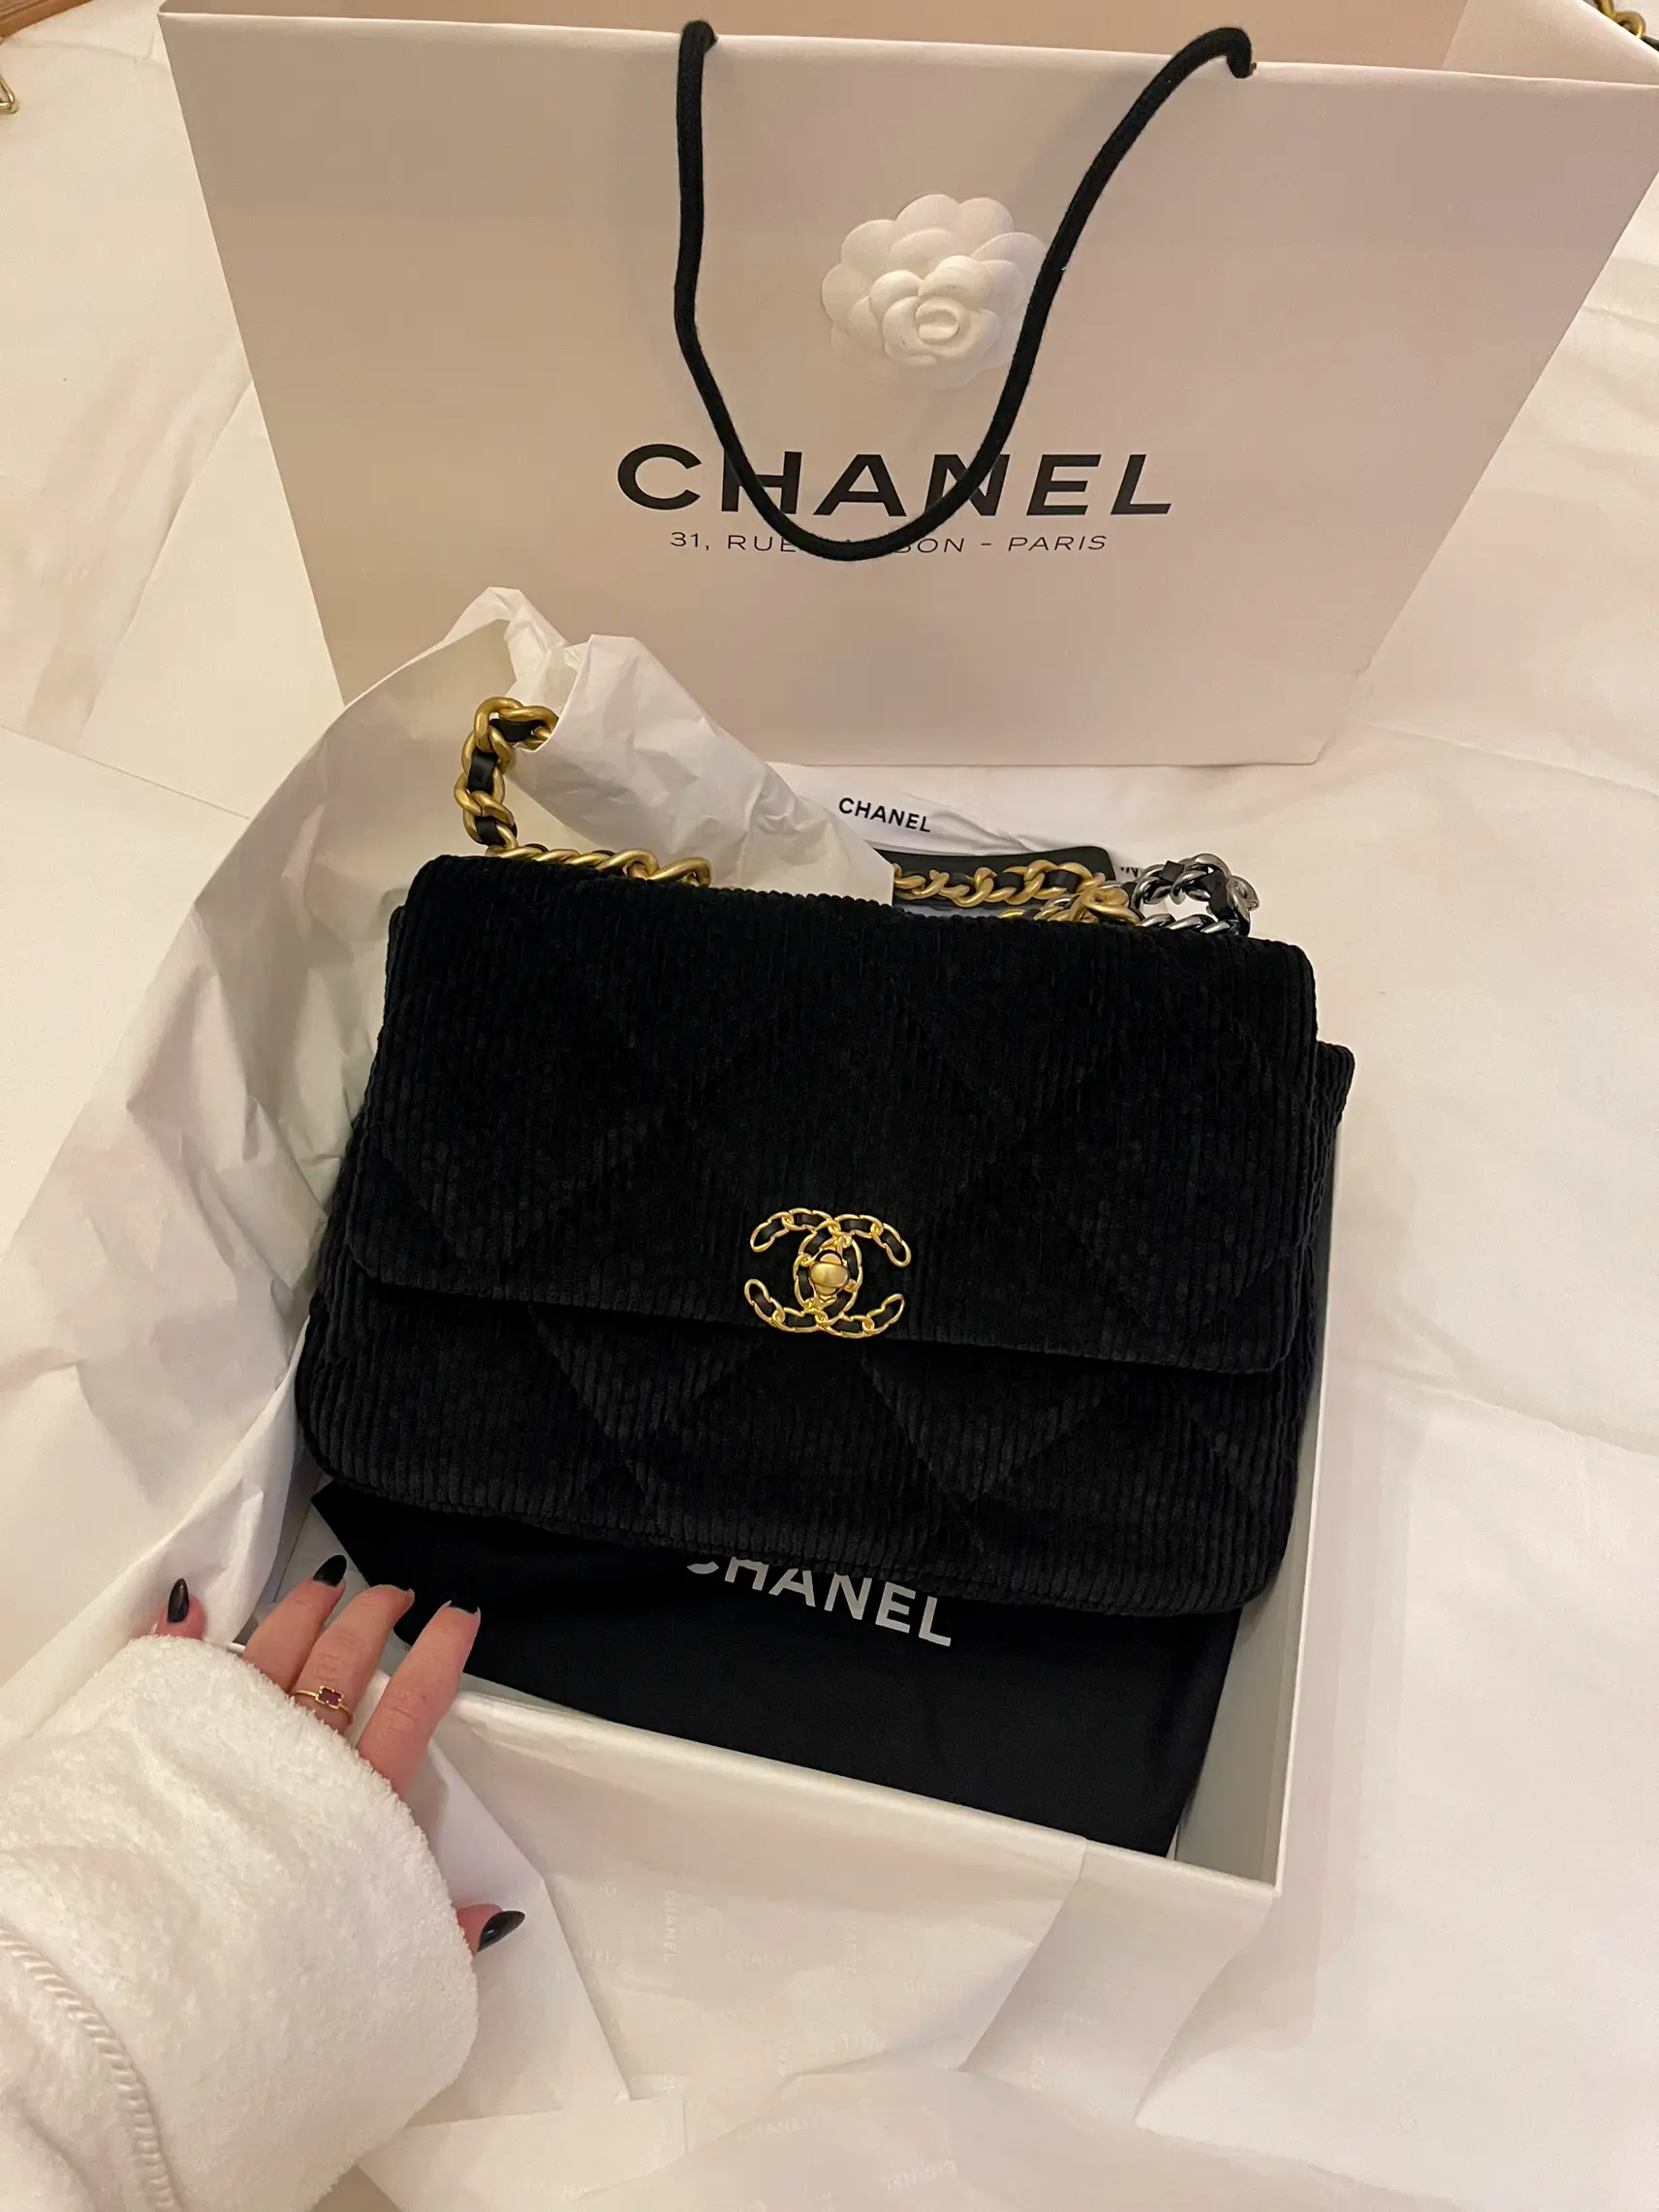 Unboxing Chanel : A series, Gallery posted by Cavanaghbaker